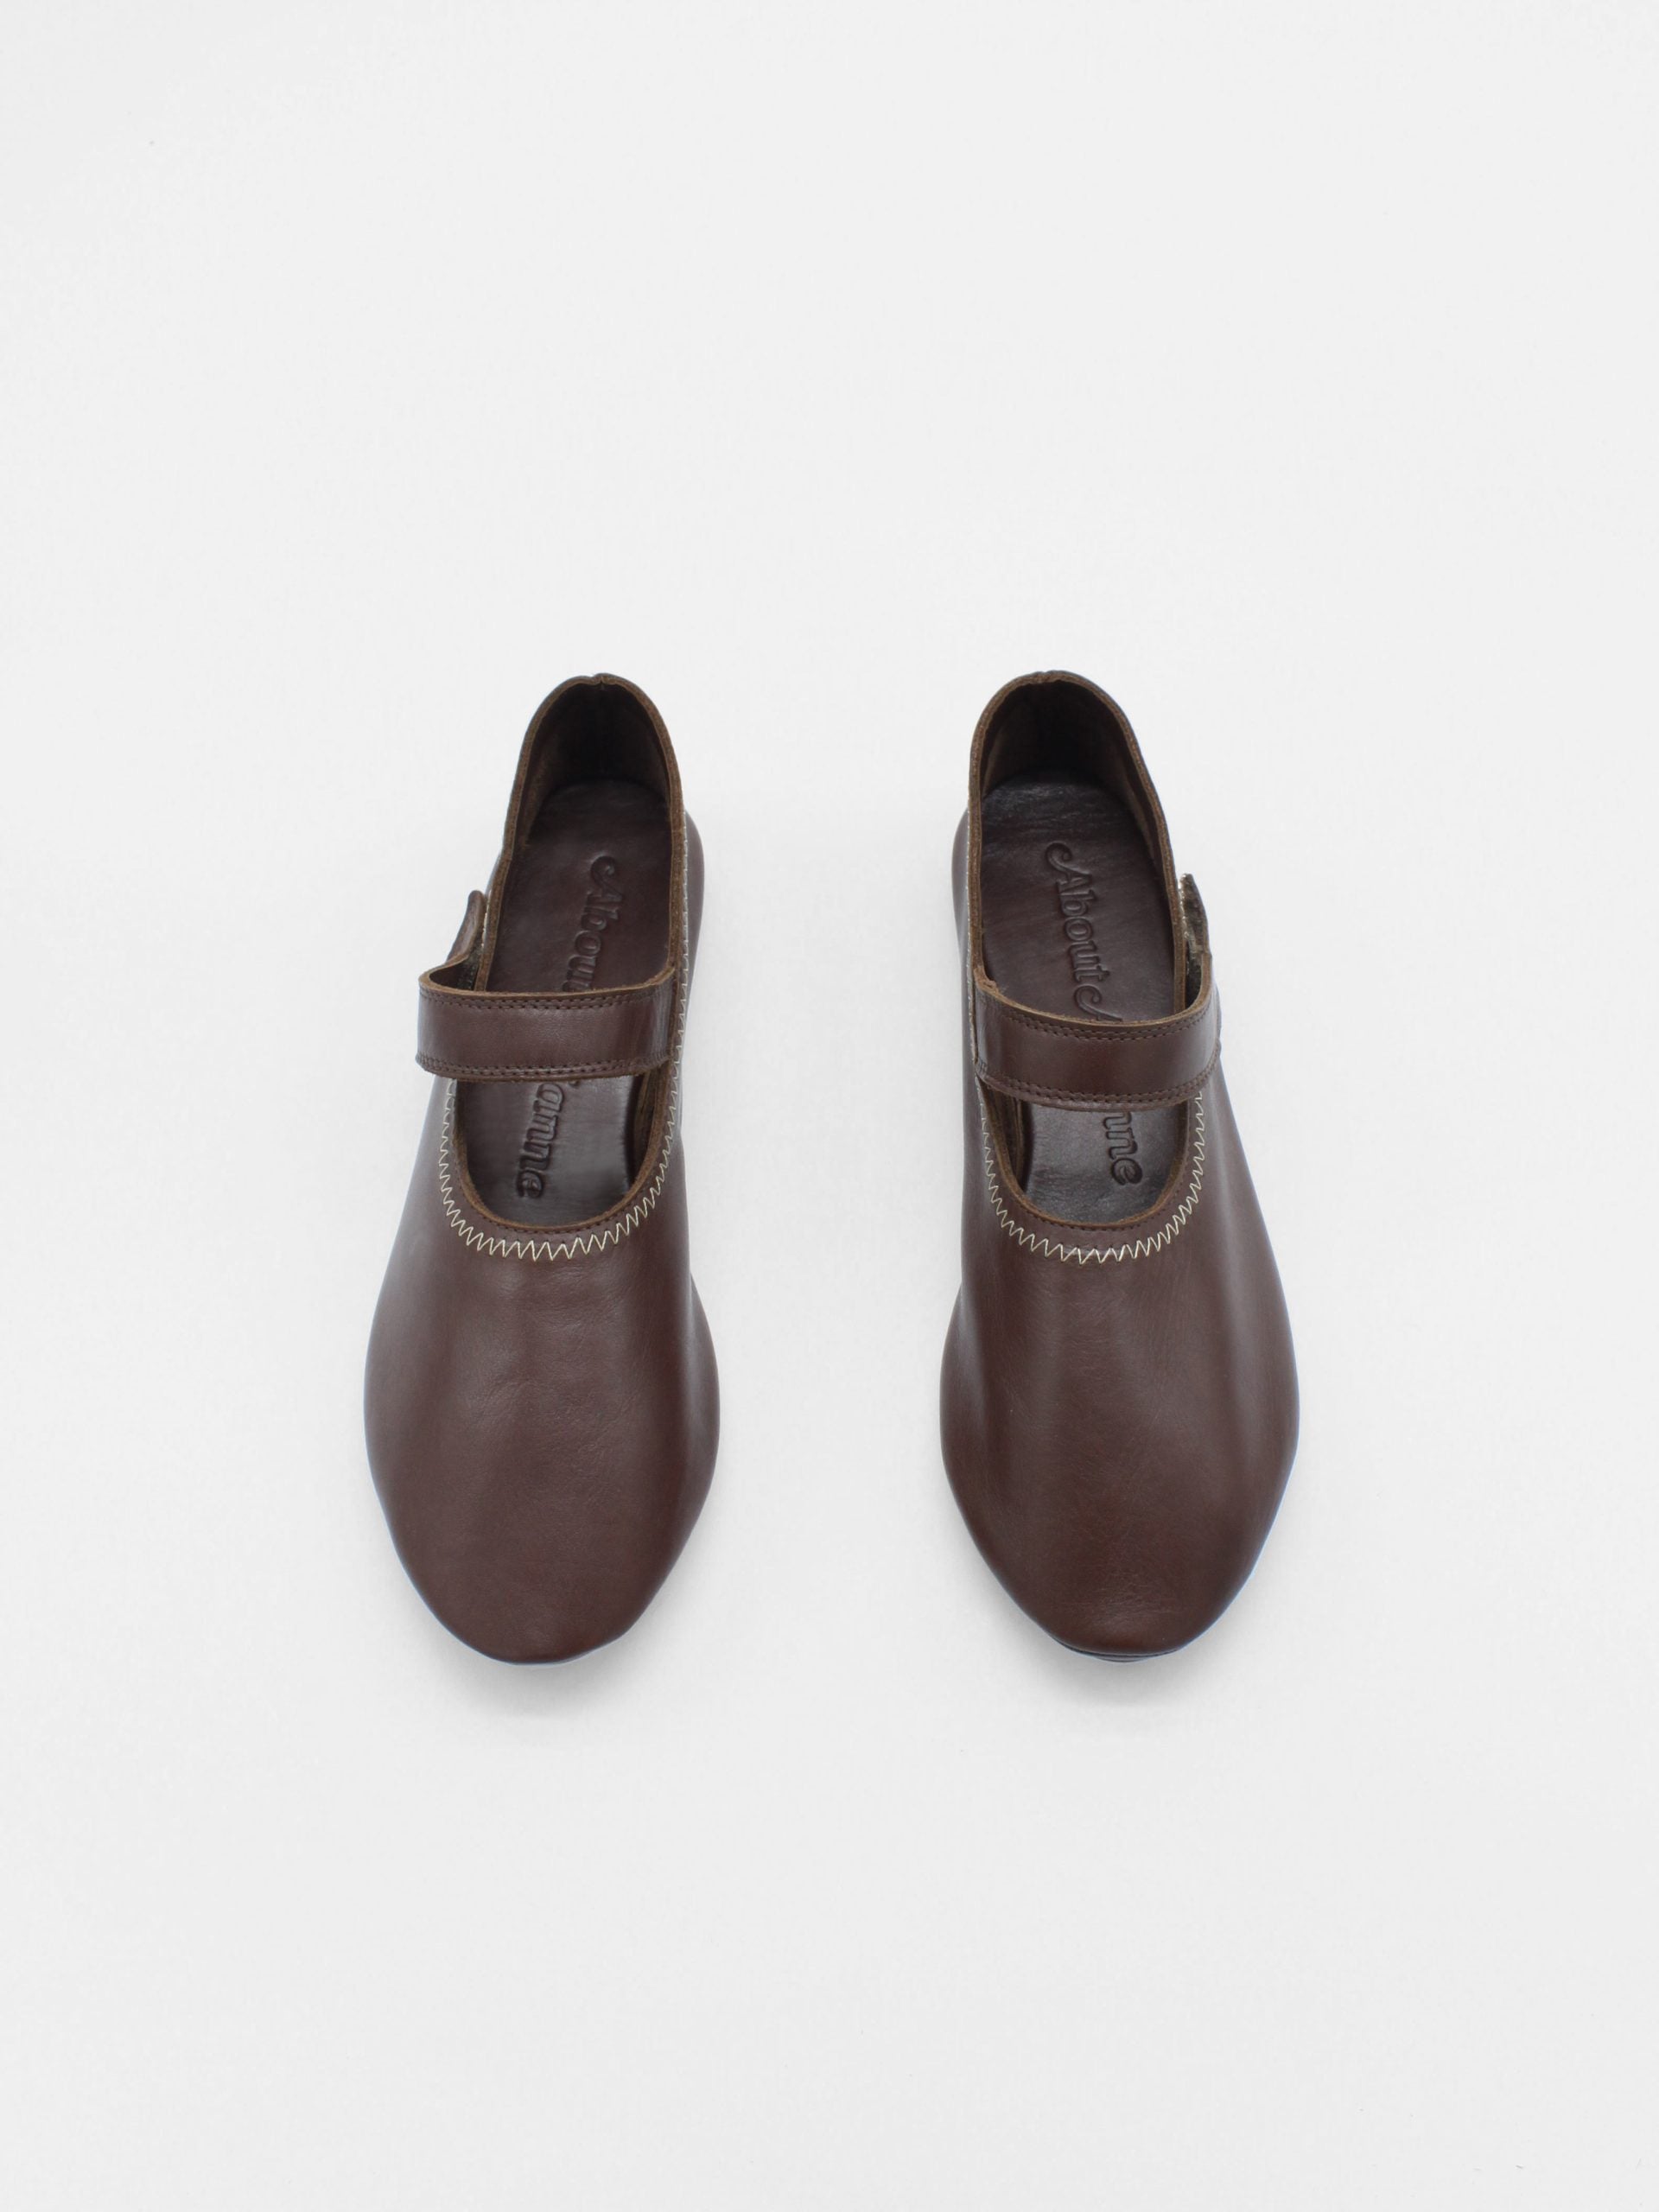 Unlined flat mary-jane made of dark brown lamb nappa leather with a shiny finish and stitching details. 